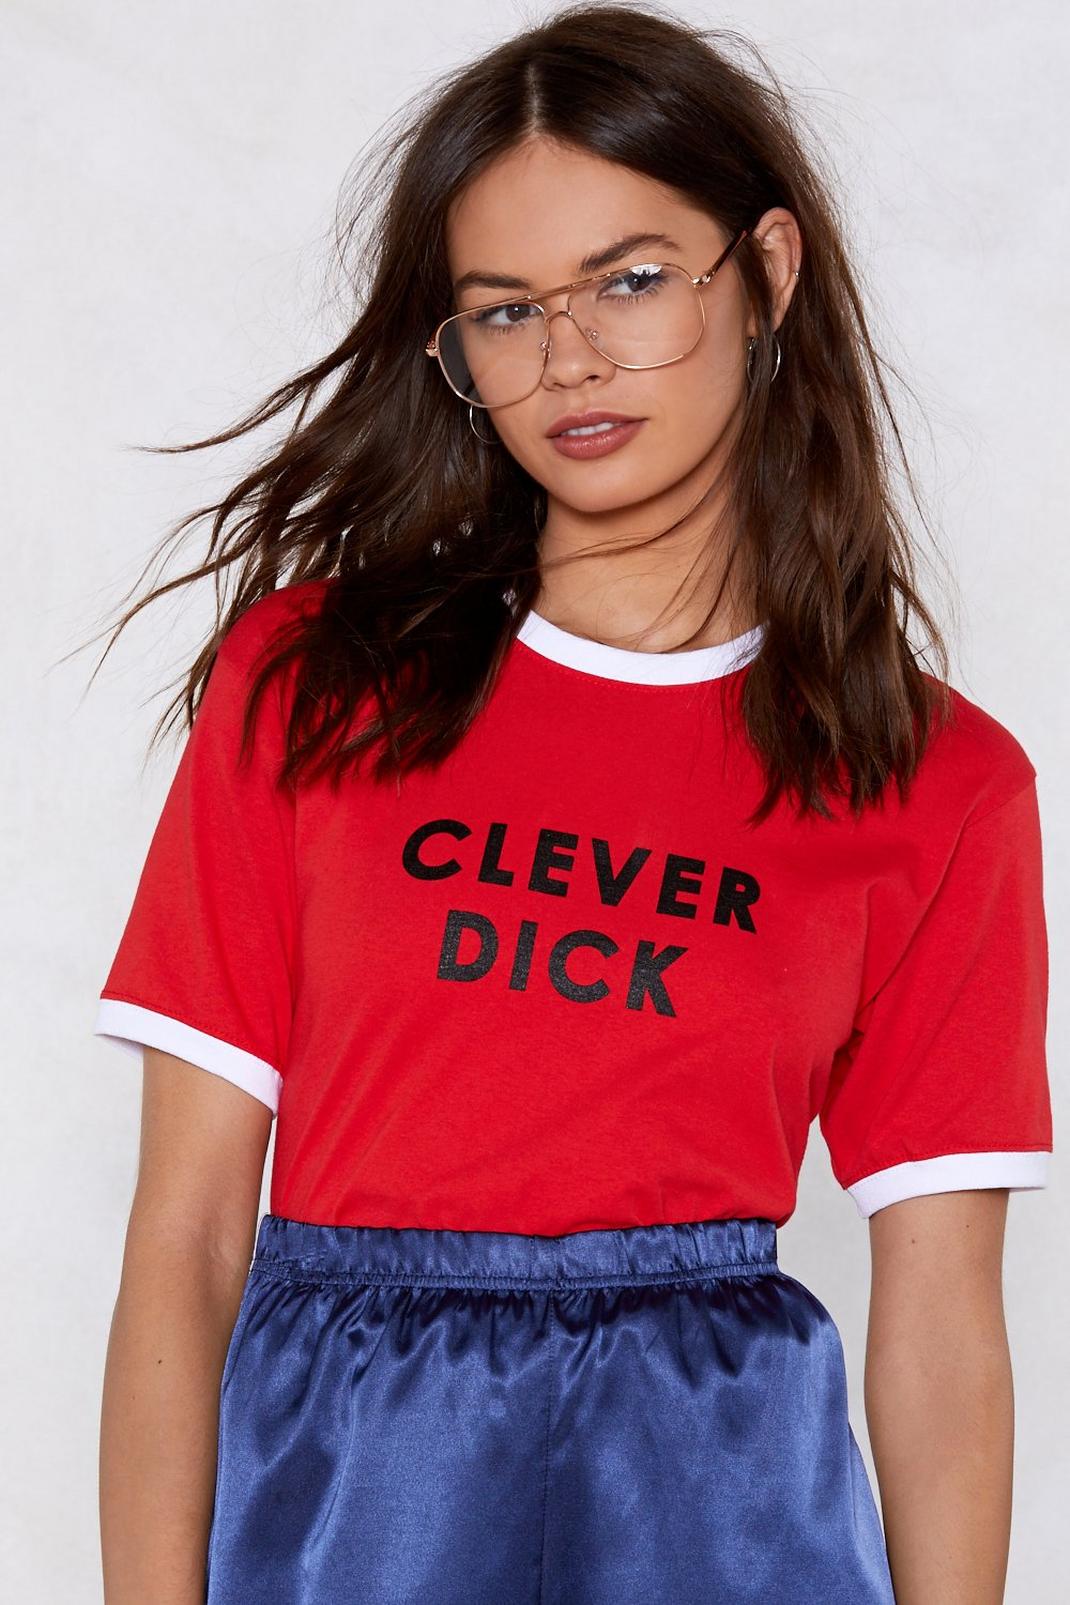 Clever Dick Ringer Tee | Nasty Gal